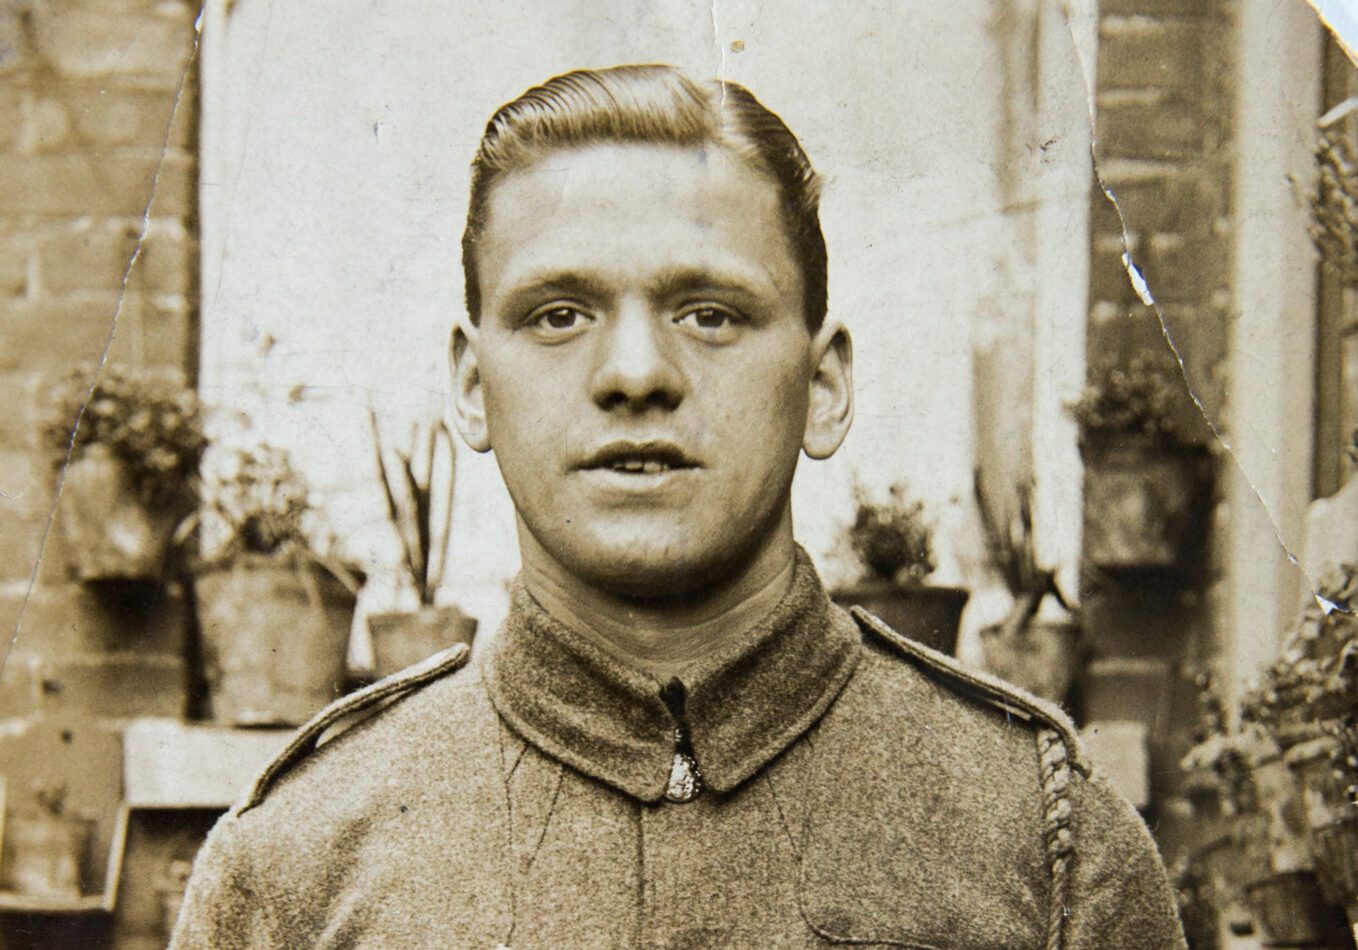 English soldier, portrait  of young man 1940th, vintage photo